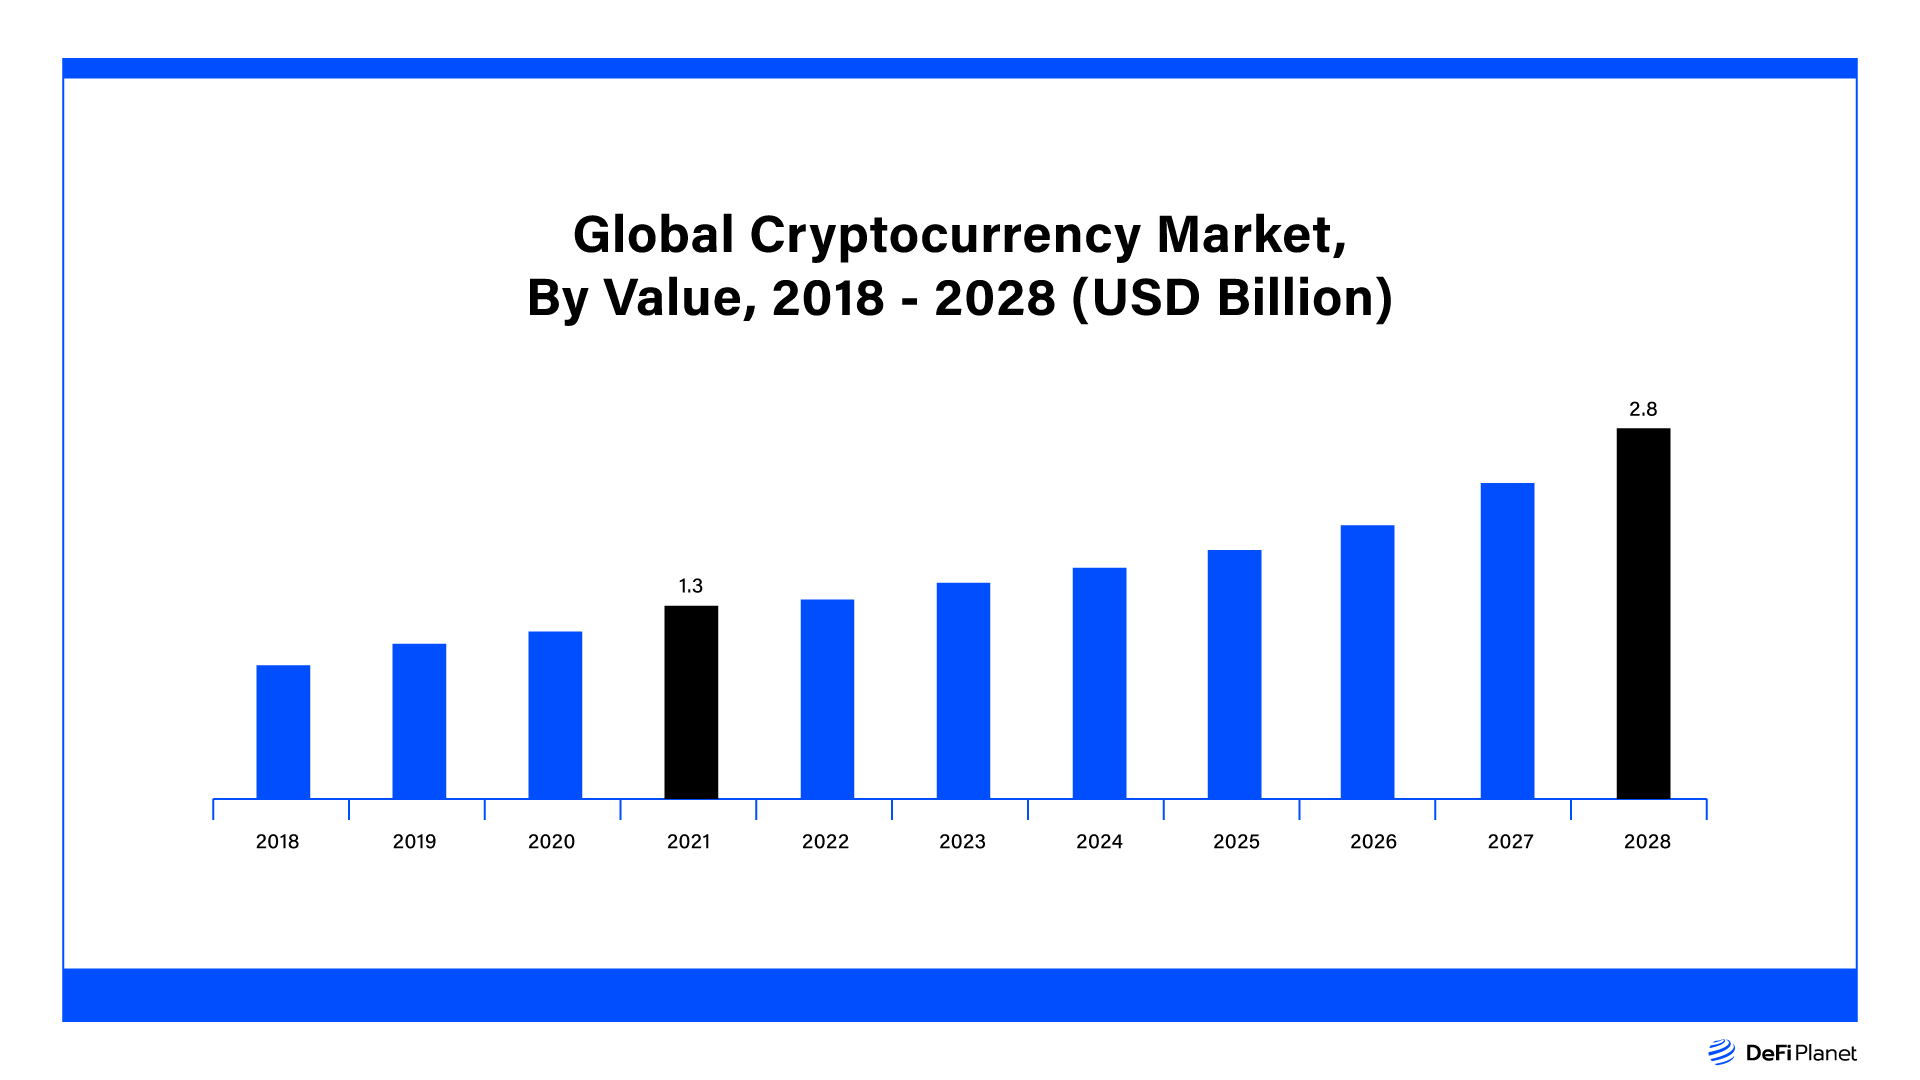 Global Cryptocurrency Market. by value 2018-2028 (USD Billion) on DeFi Planet